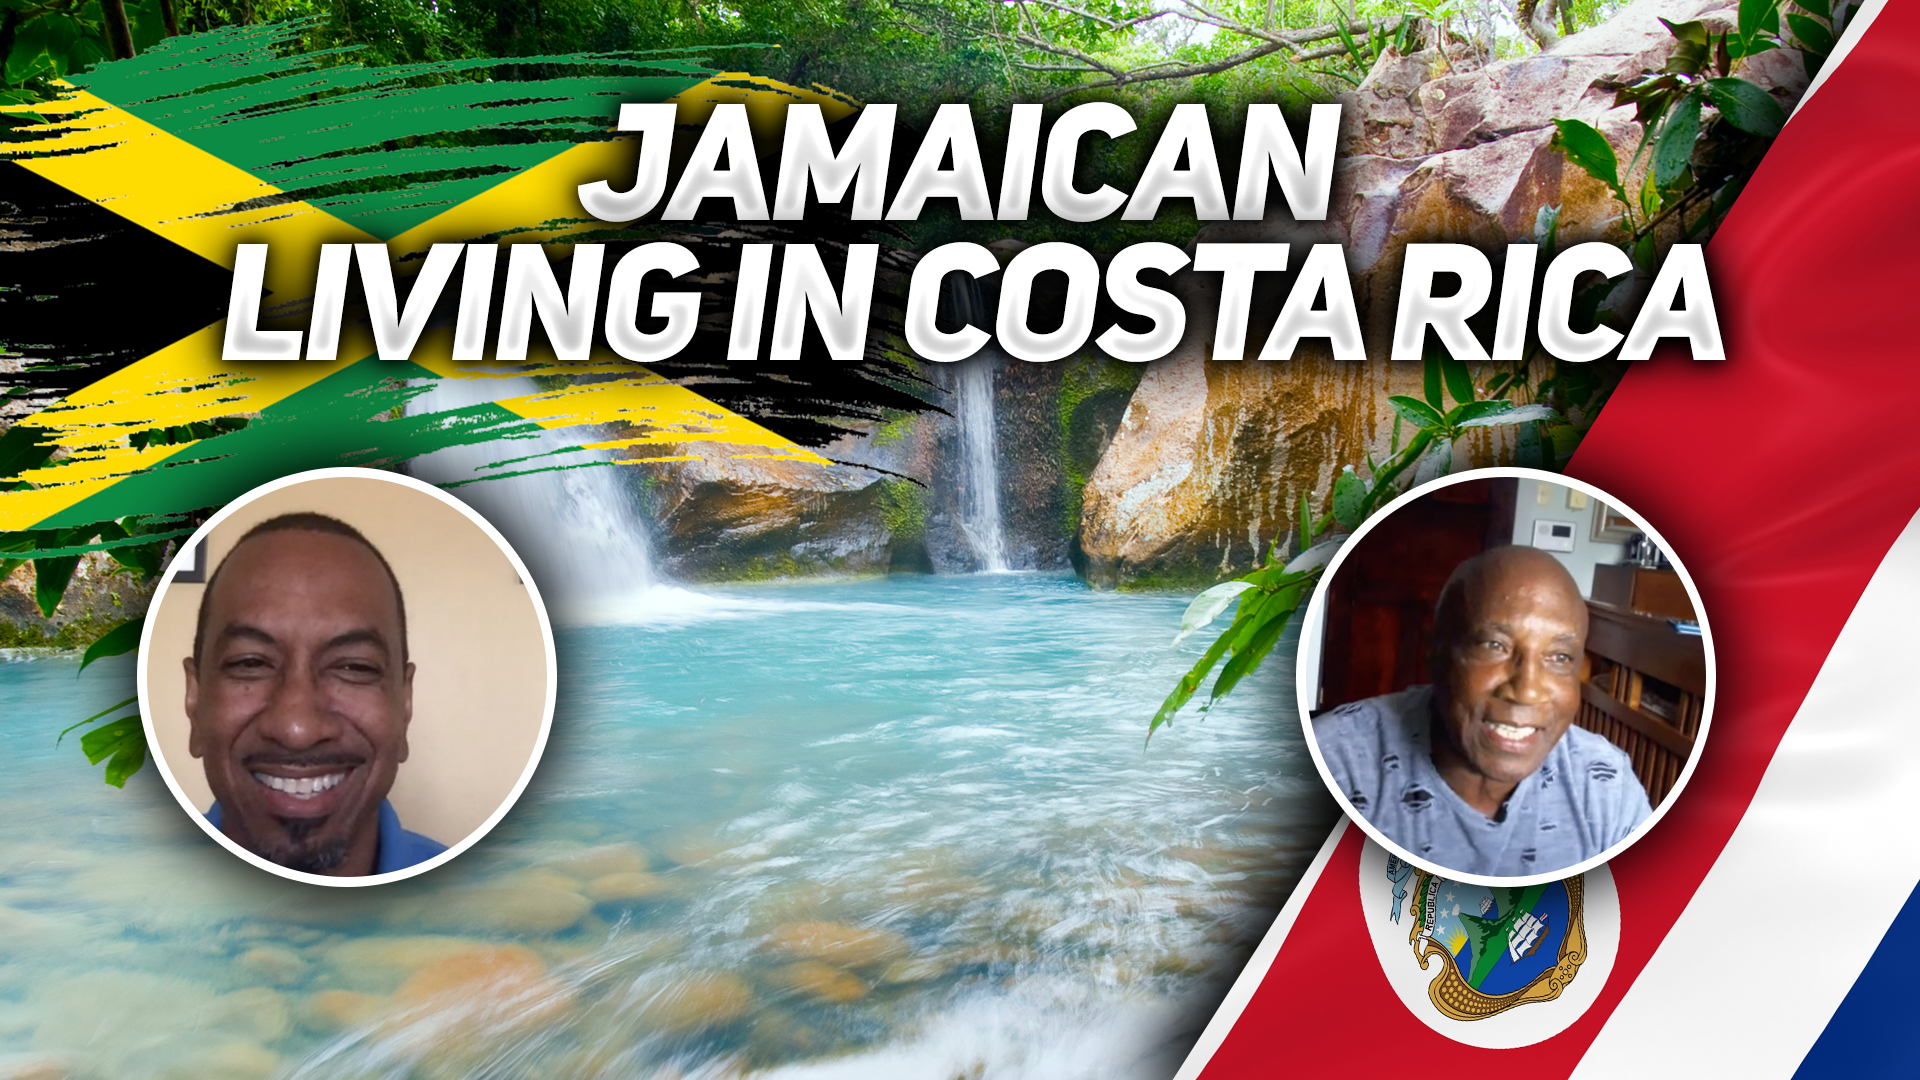 What’s It Like Being a Jamaican Living in Costa Rica?